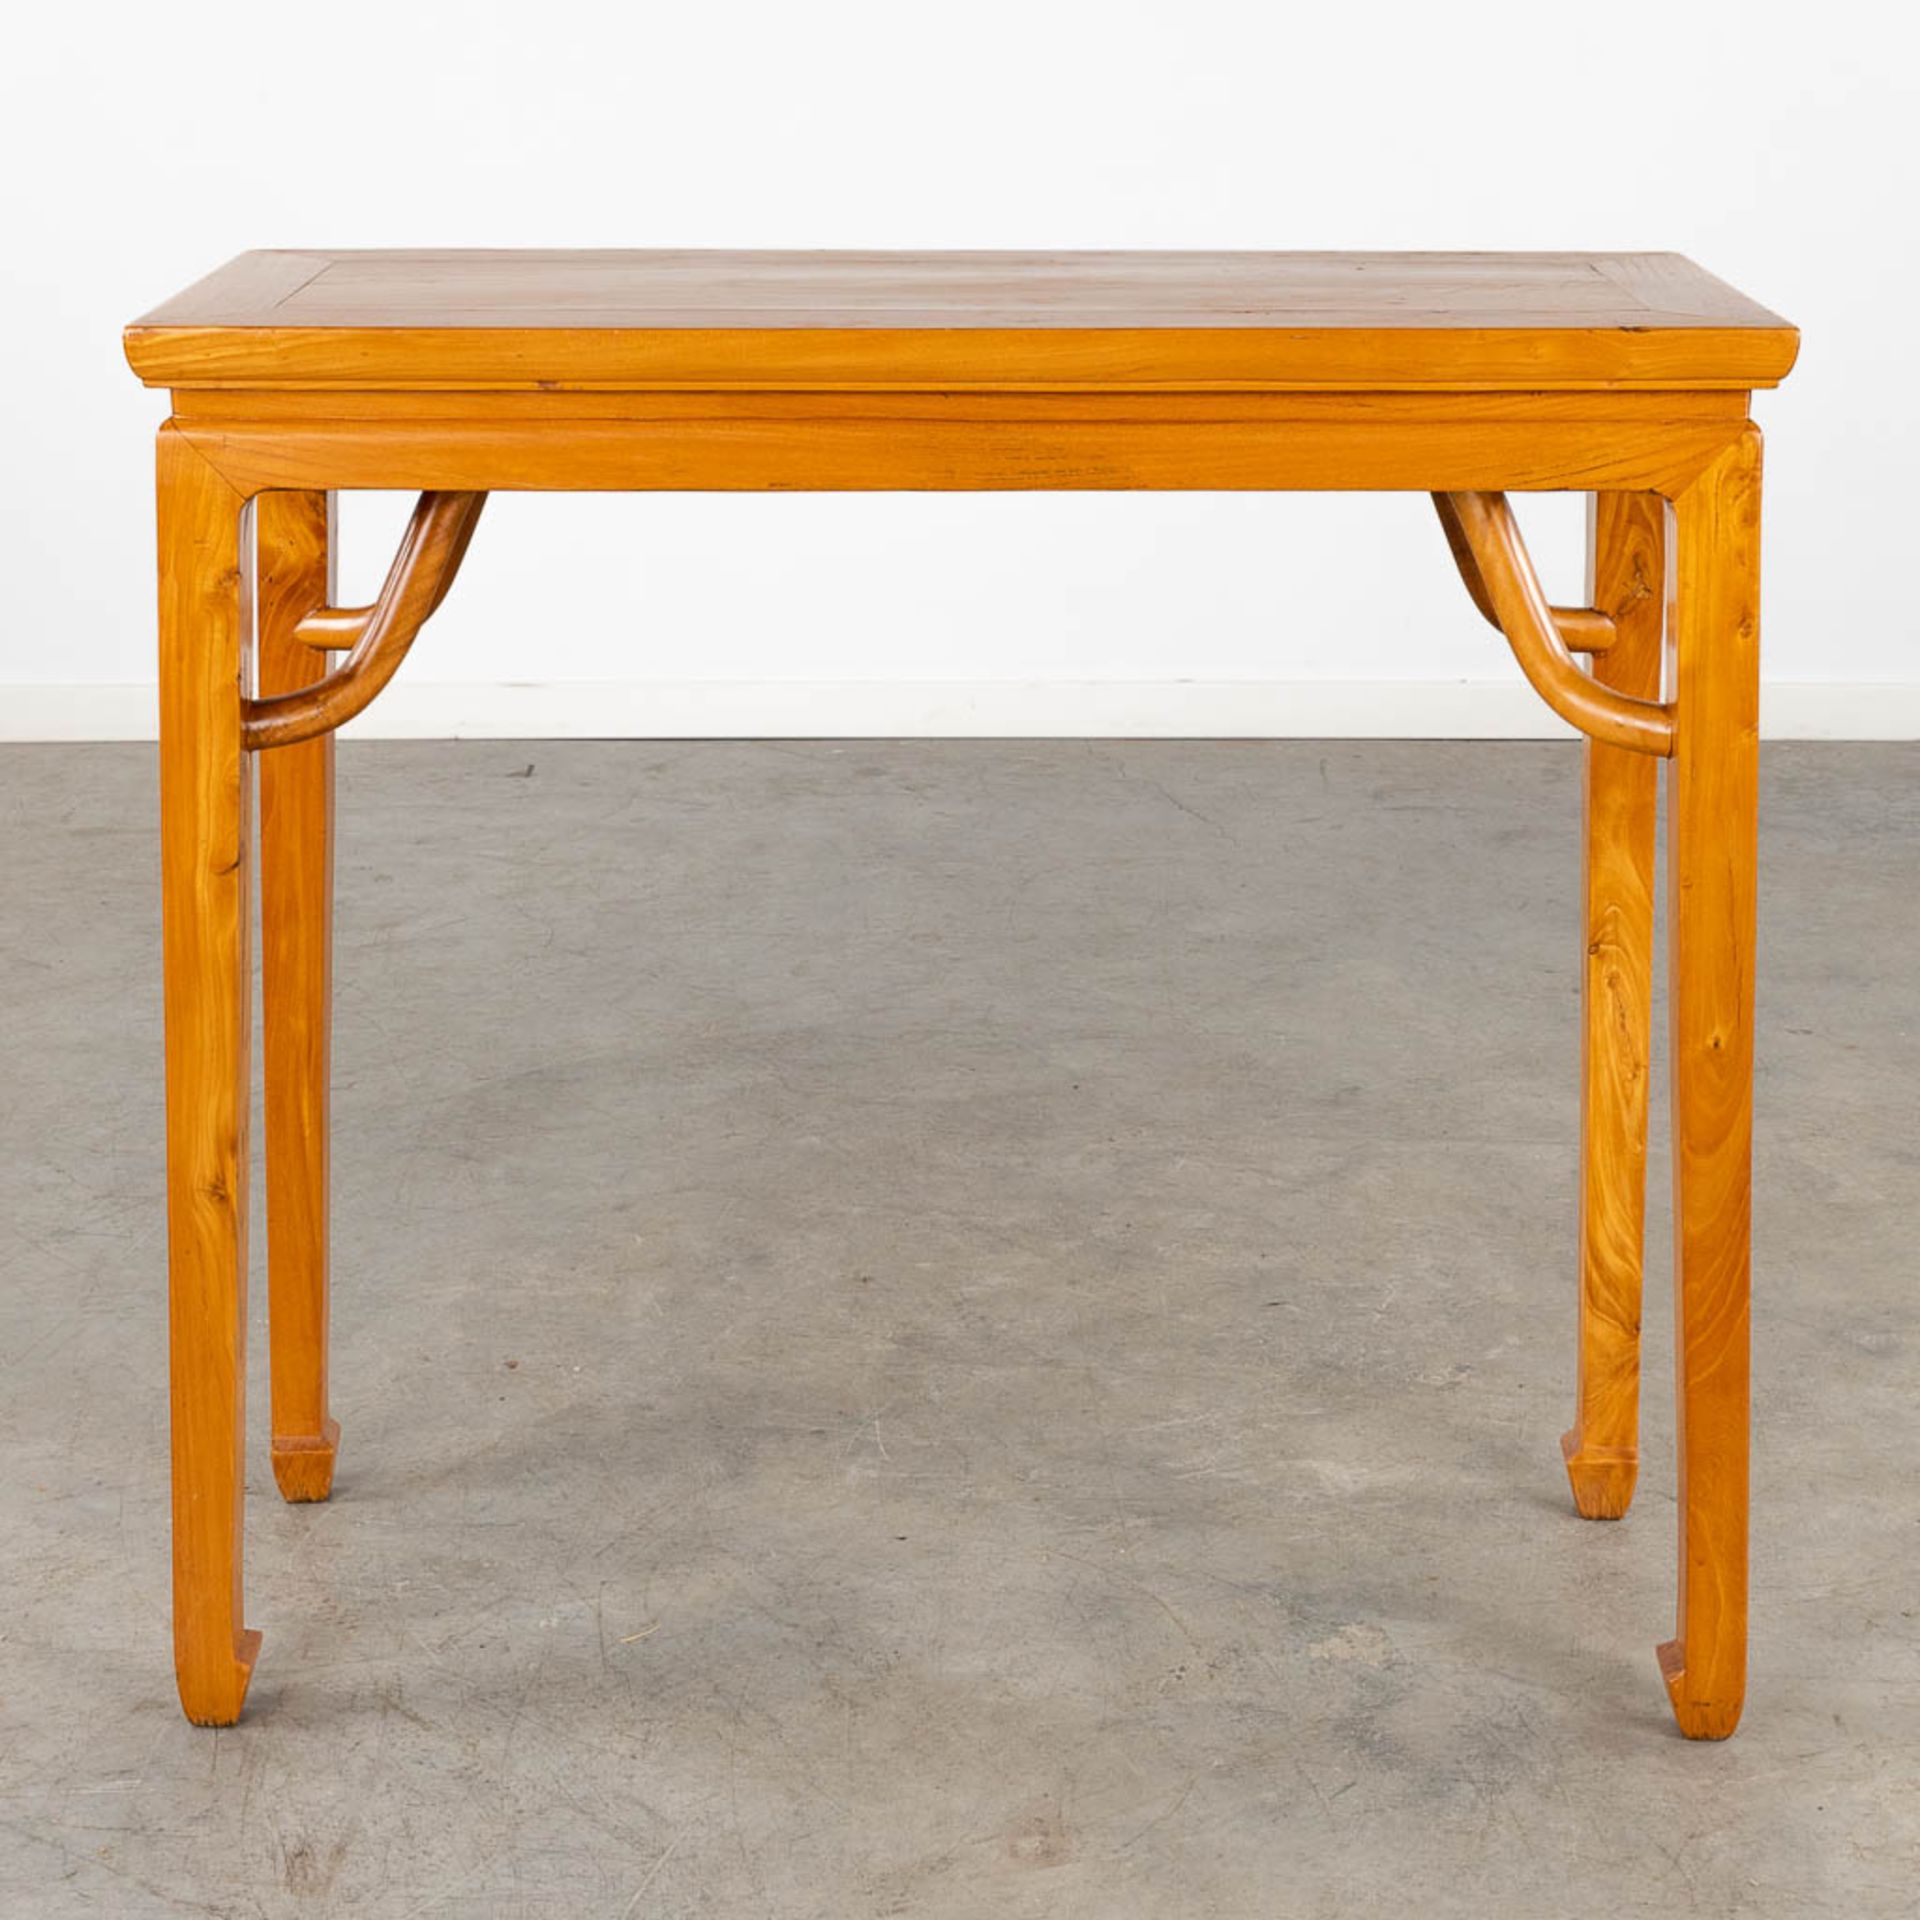 An Oriental/Chinese-inspired console table, hardwood. (D:38 x W:94 x H:84 cm) - Image 5 of 8